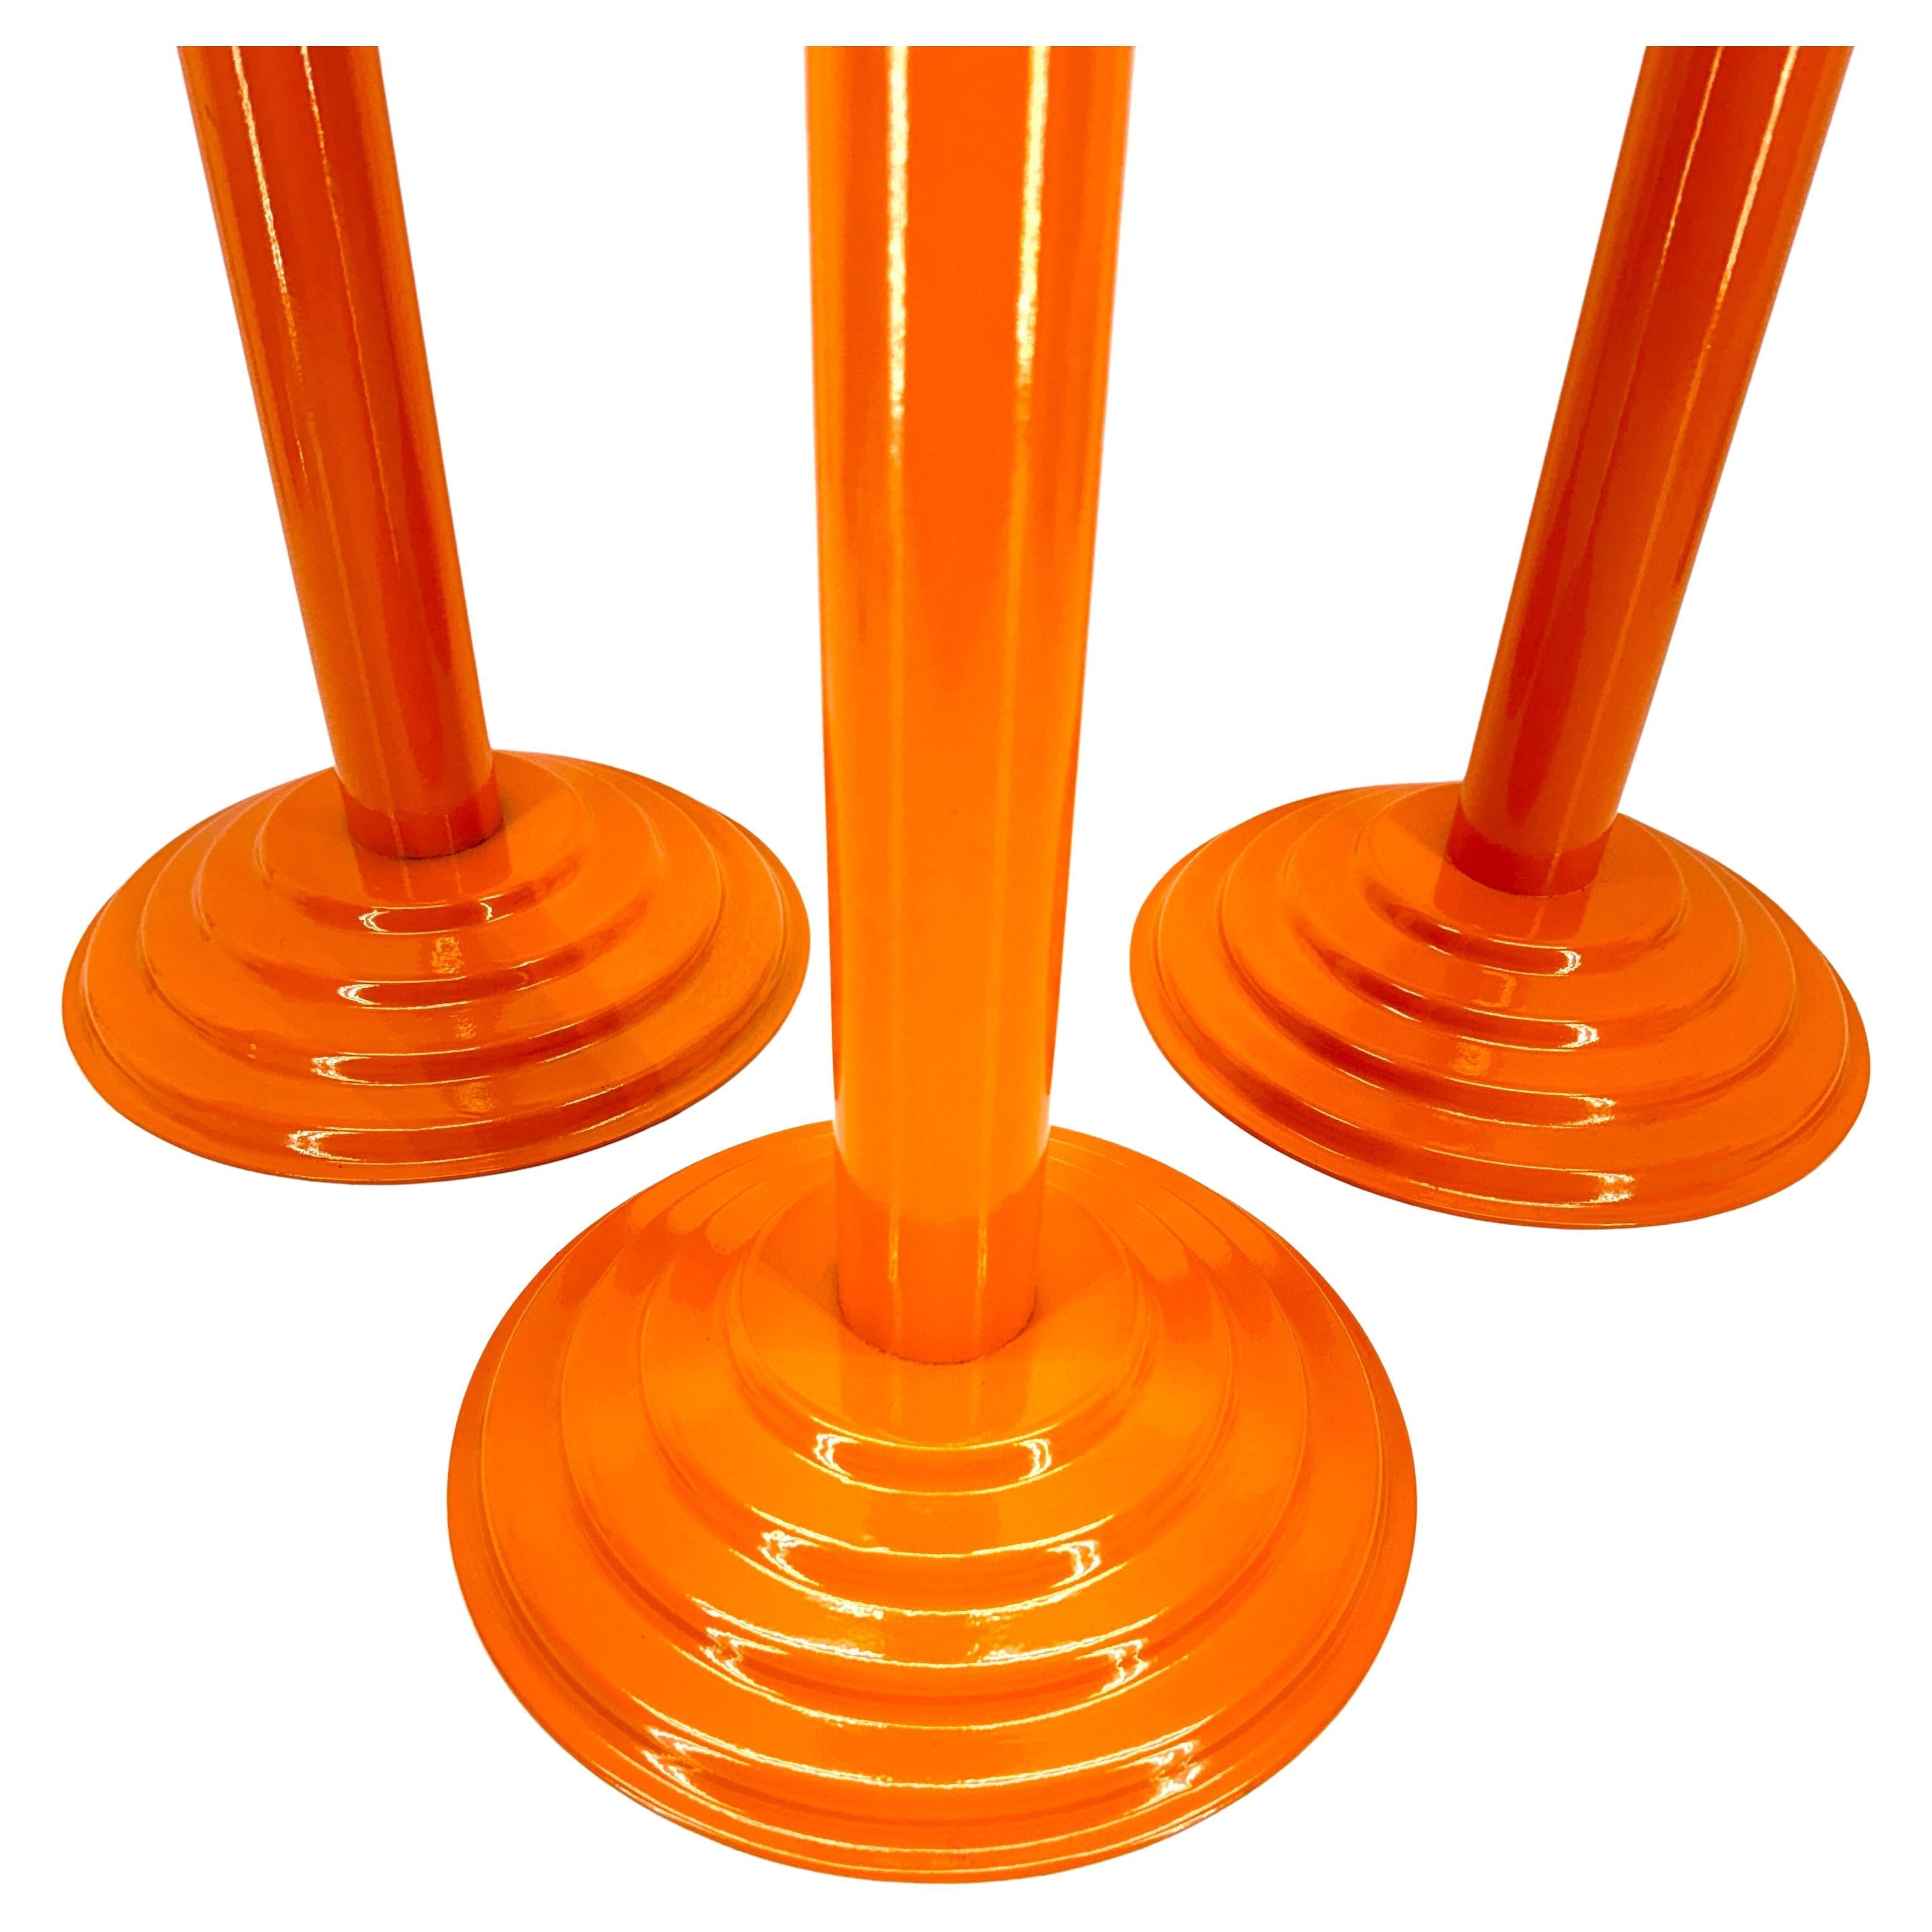 Vintage French Champagne Wine Bucket Floor Stand, Powder-Coated Orange  In Good Condition For Sale In Haddonfield, NJ